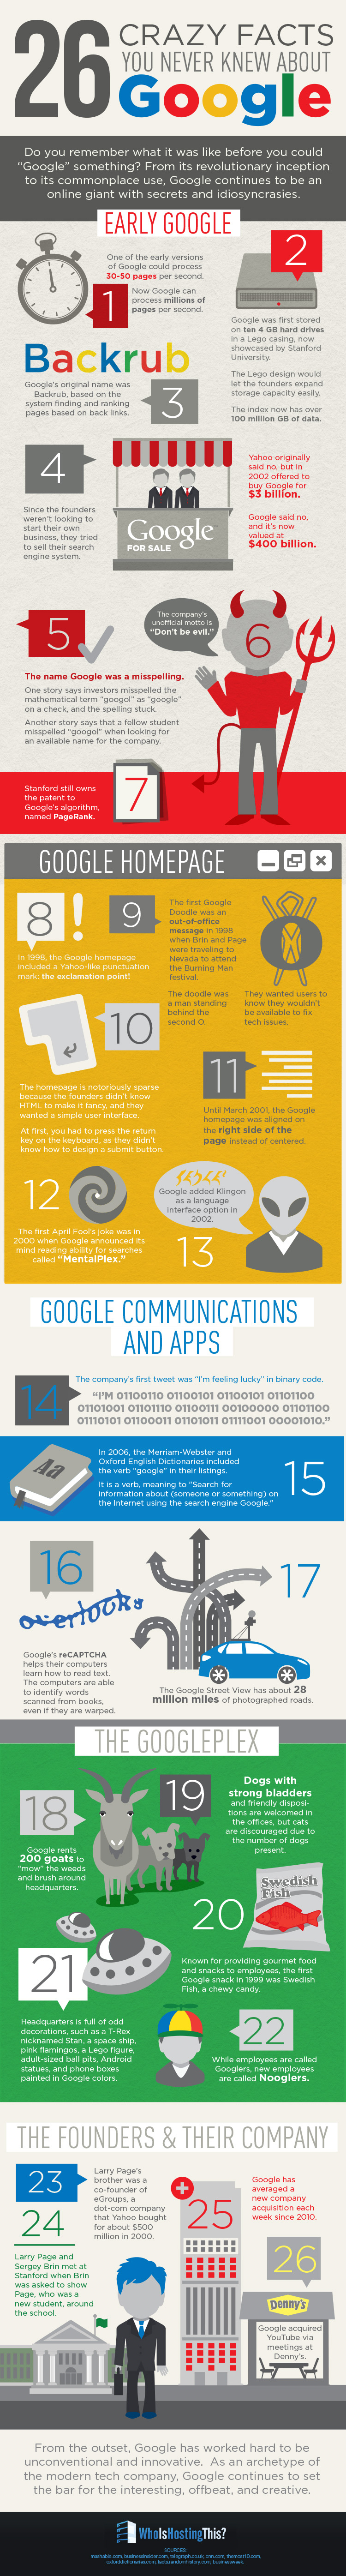 26 Surprising Facts About Google